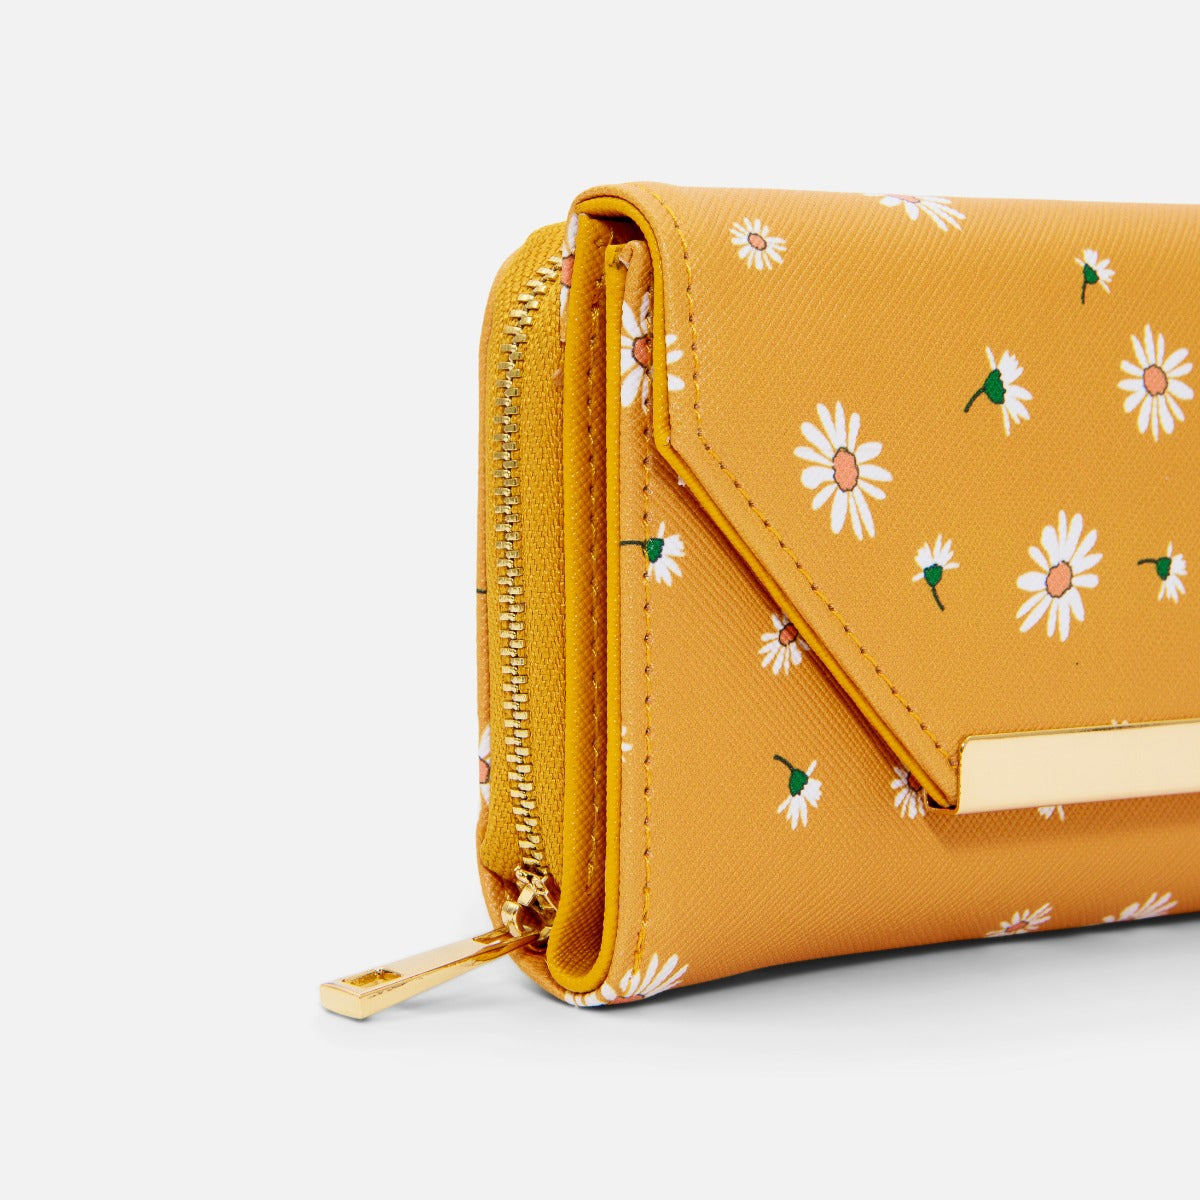 Ocher wallet with flap with golden details and white daisy print